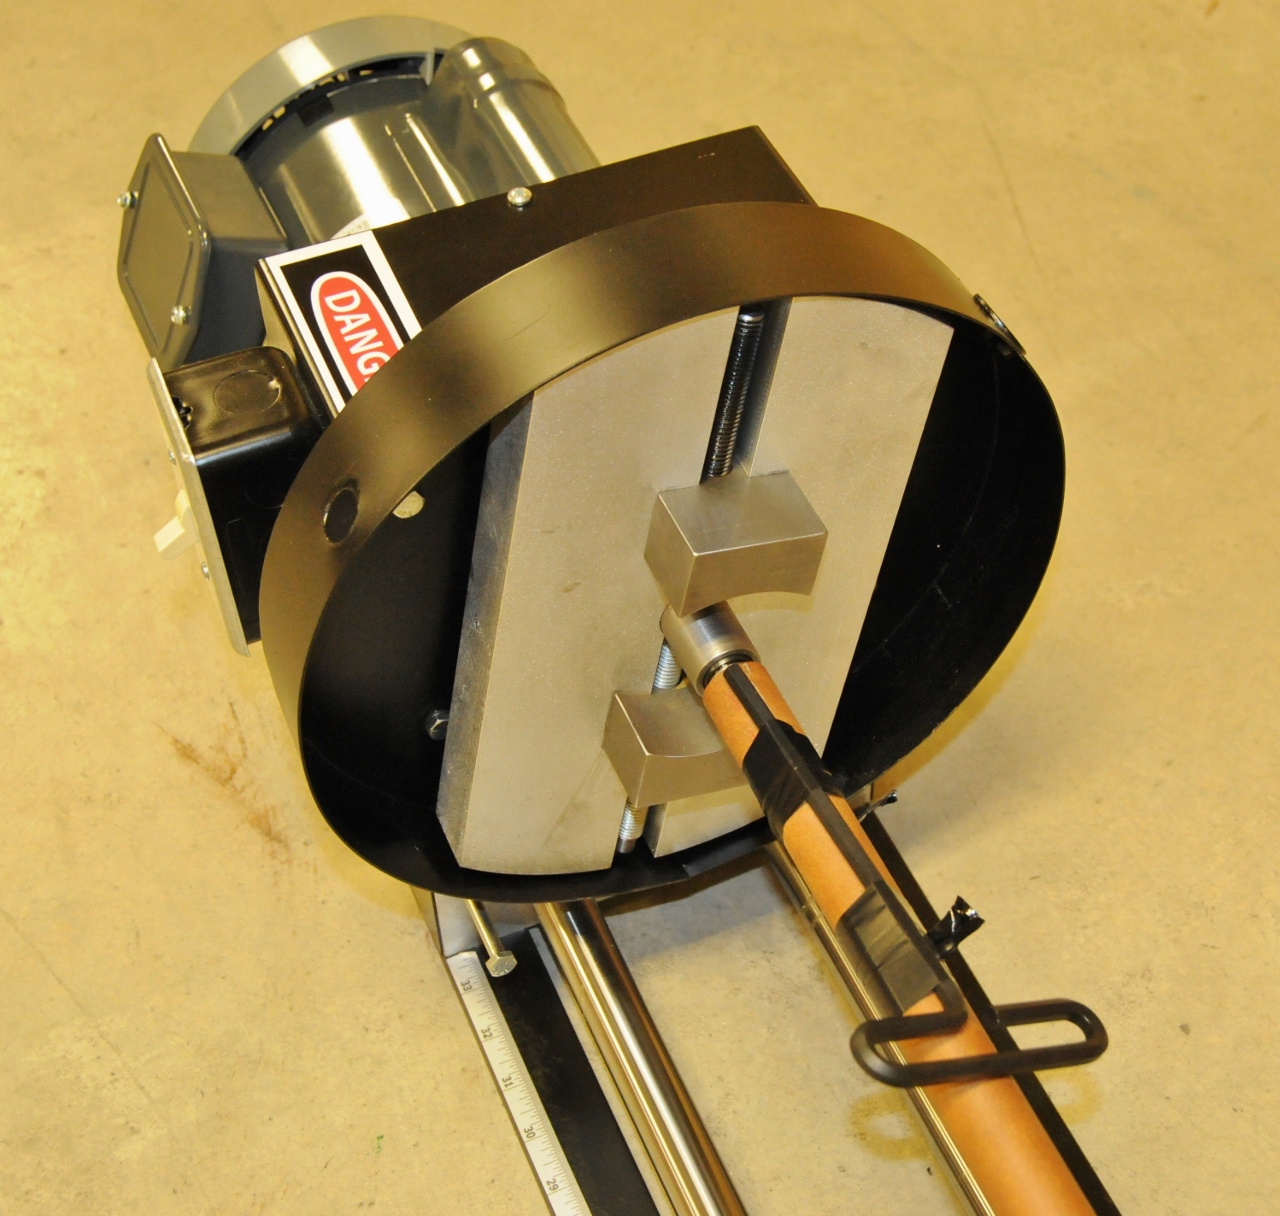 Image of the General Roll Leaf HDFC-1000 foil cutter